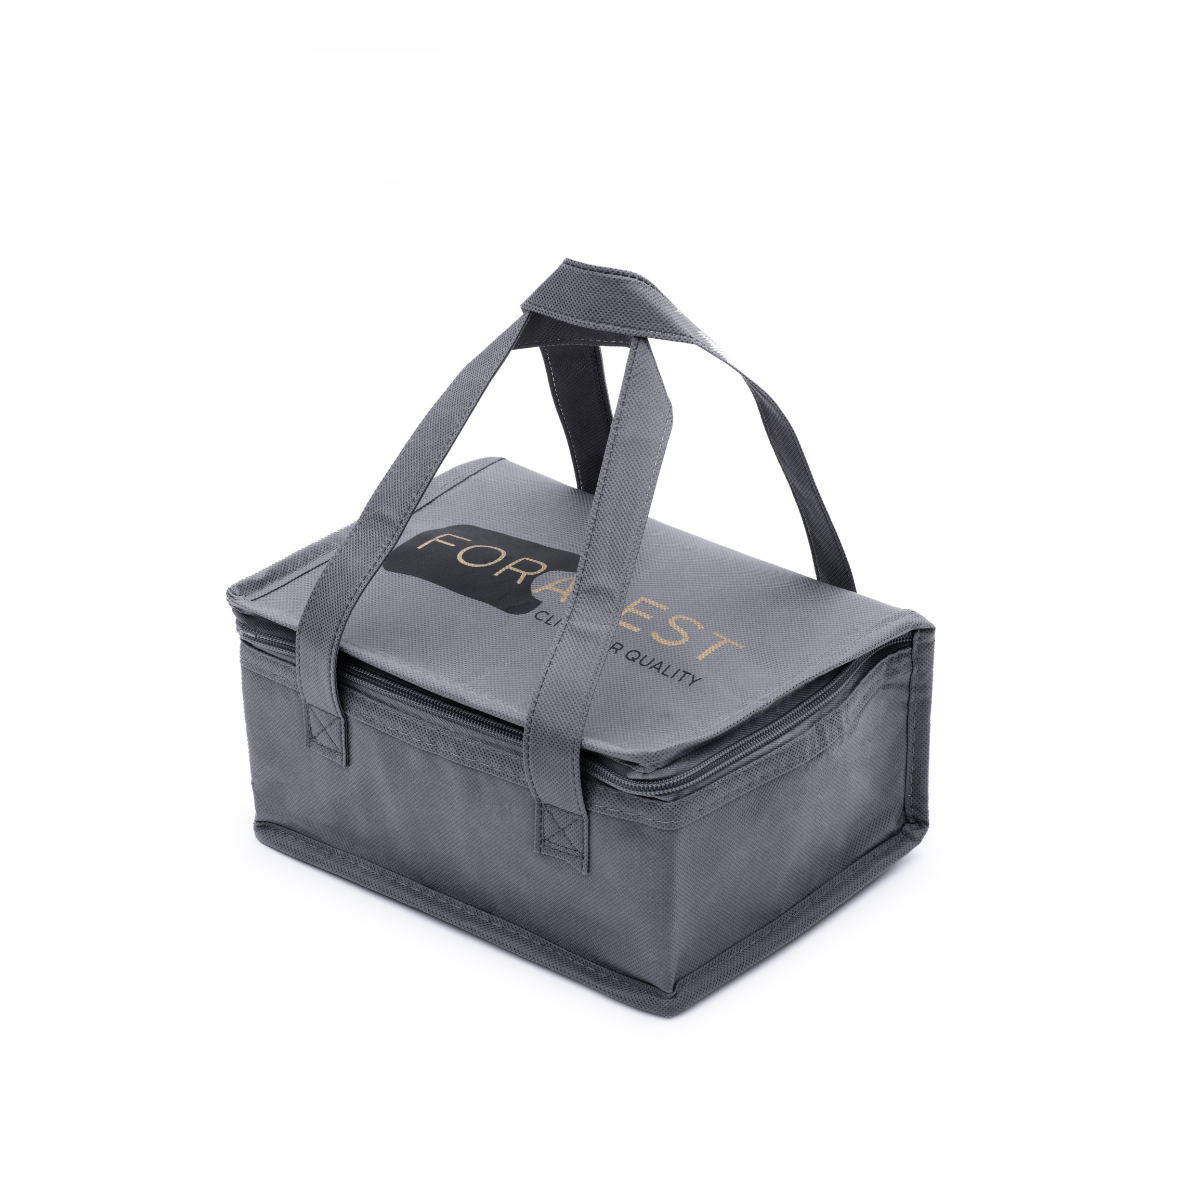 FORABEST 1.8L Electric Lunch Box- Larger Upgraded 50W - Dark Grey